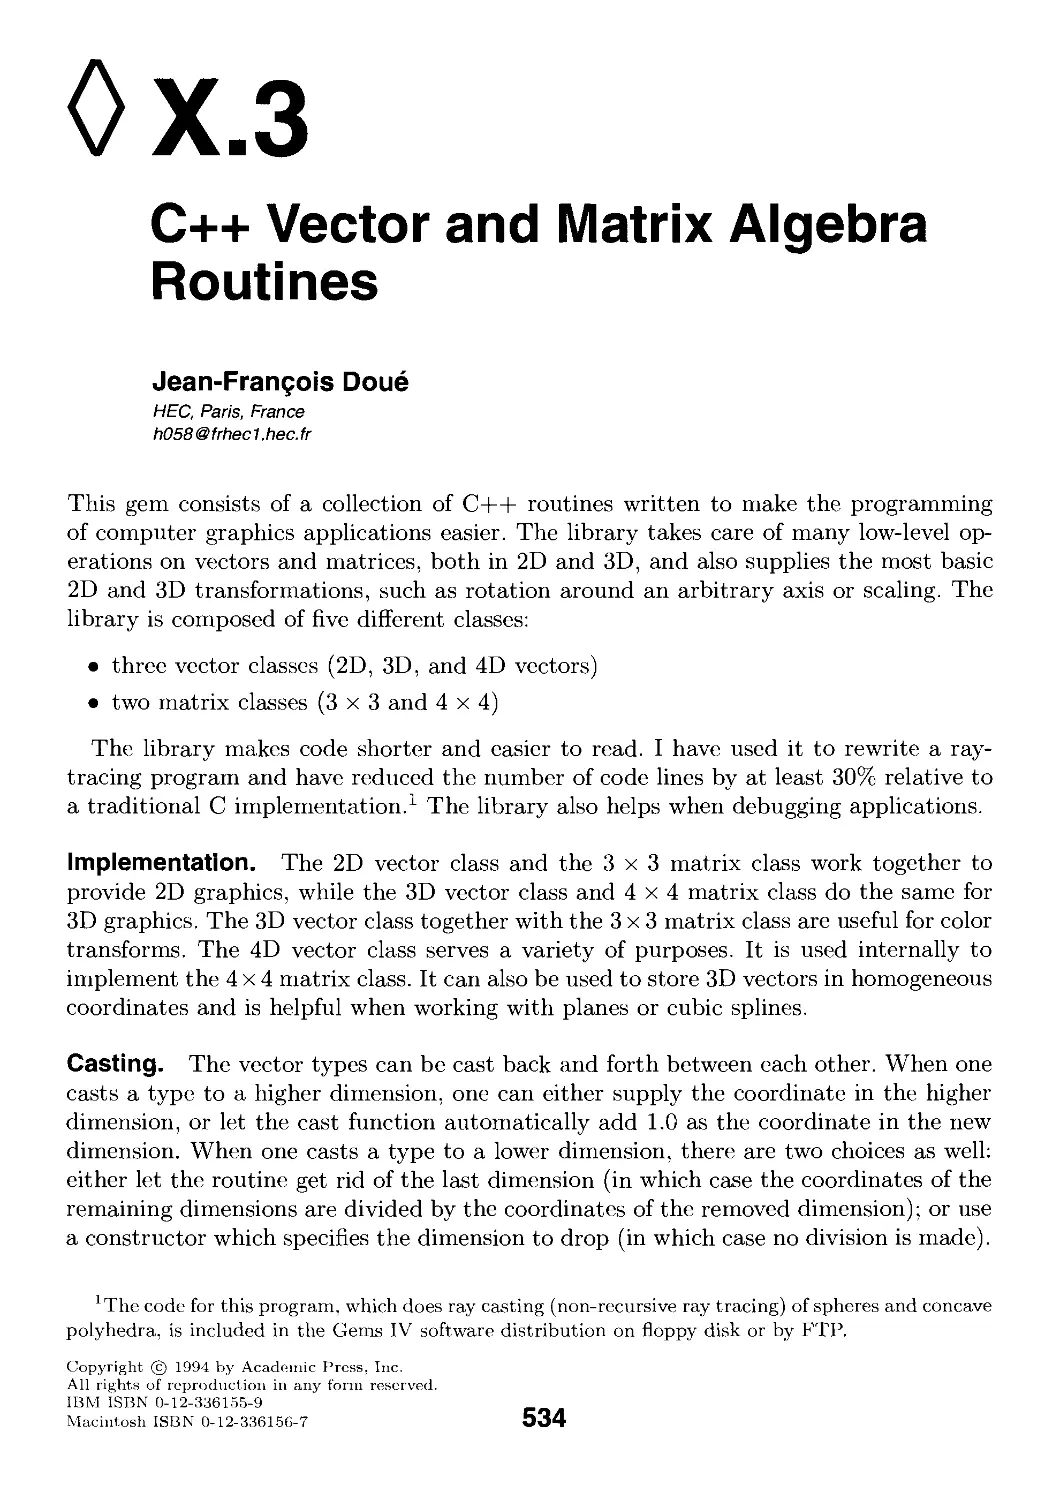 X.3. C++ Vector and Matrix Algebra Routines by Jean-Frangois Doue